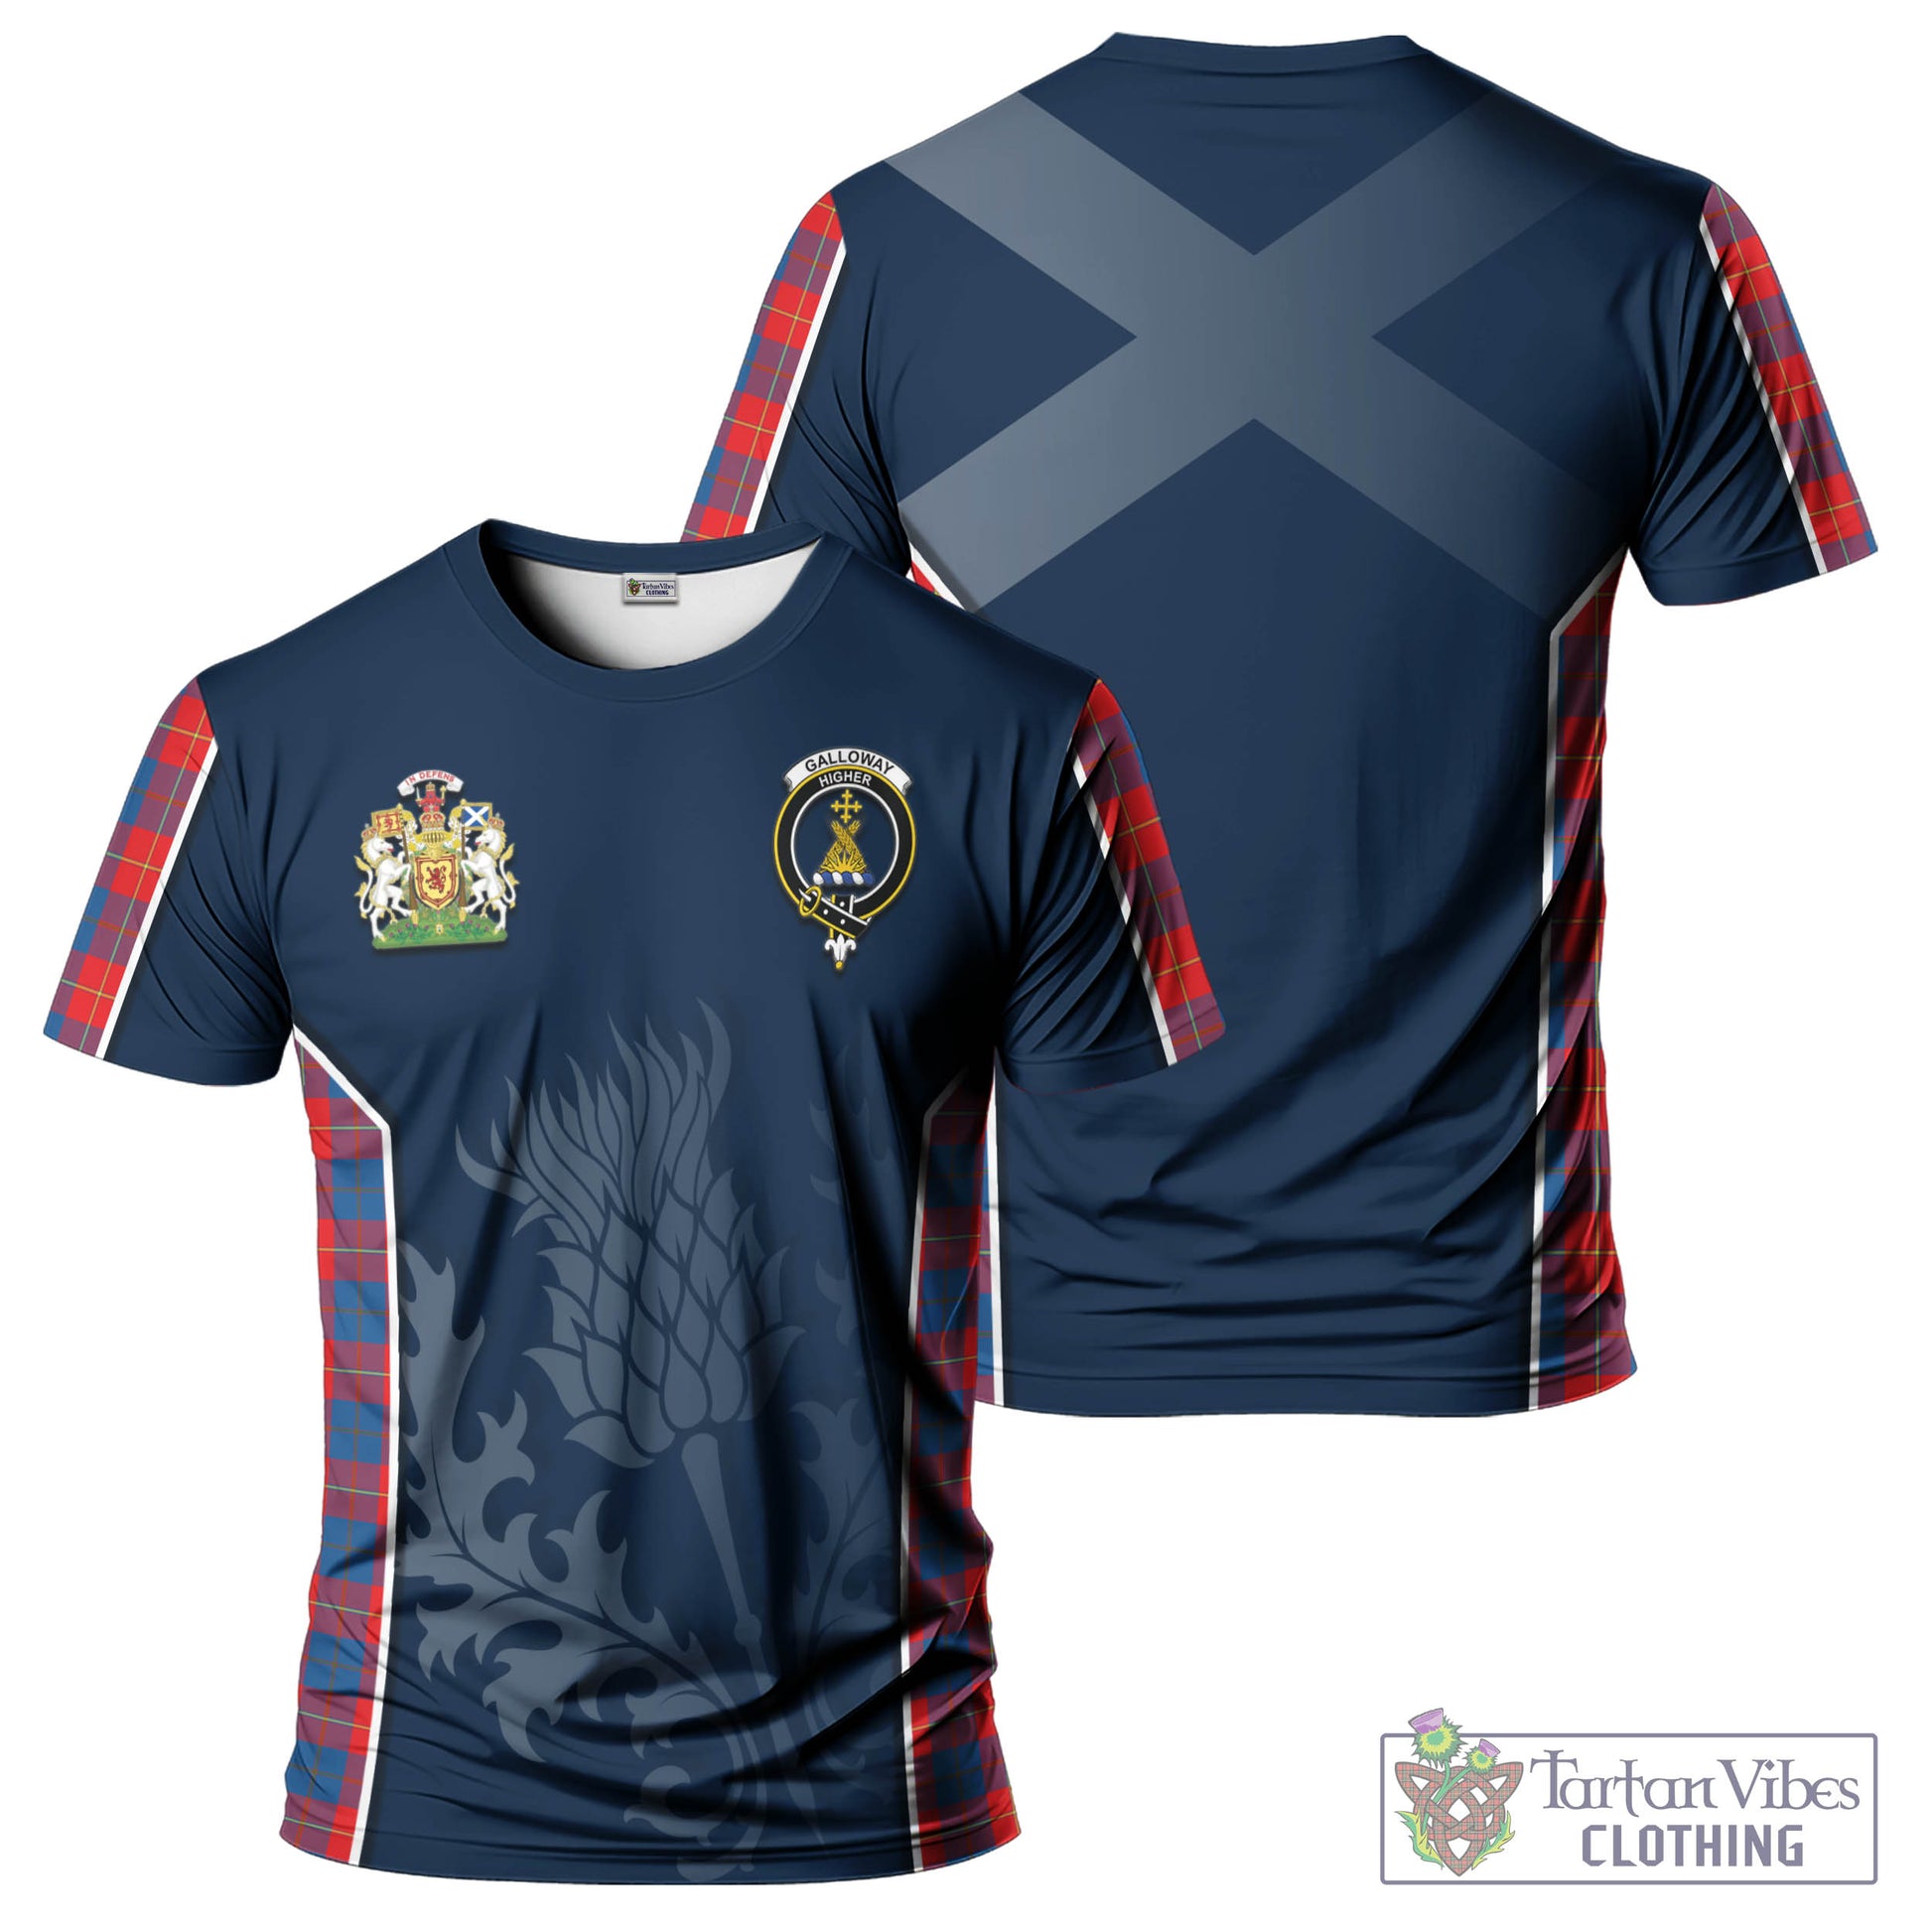 Tartan Vibes Clothing Galloway Red Tartan T-Shirt with Family Crest and Scottish Thistle Vibes Sport Style